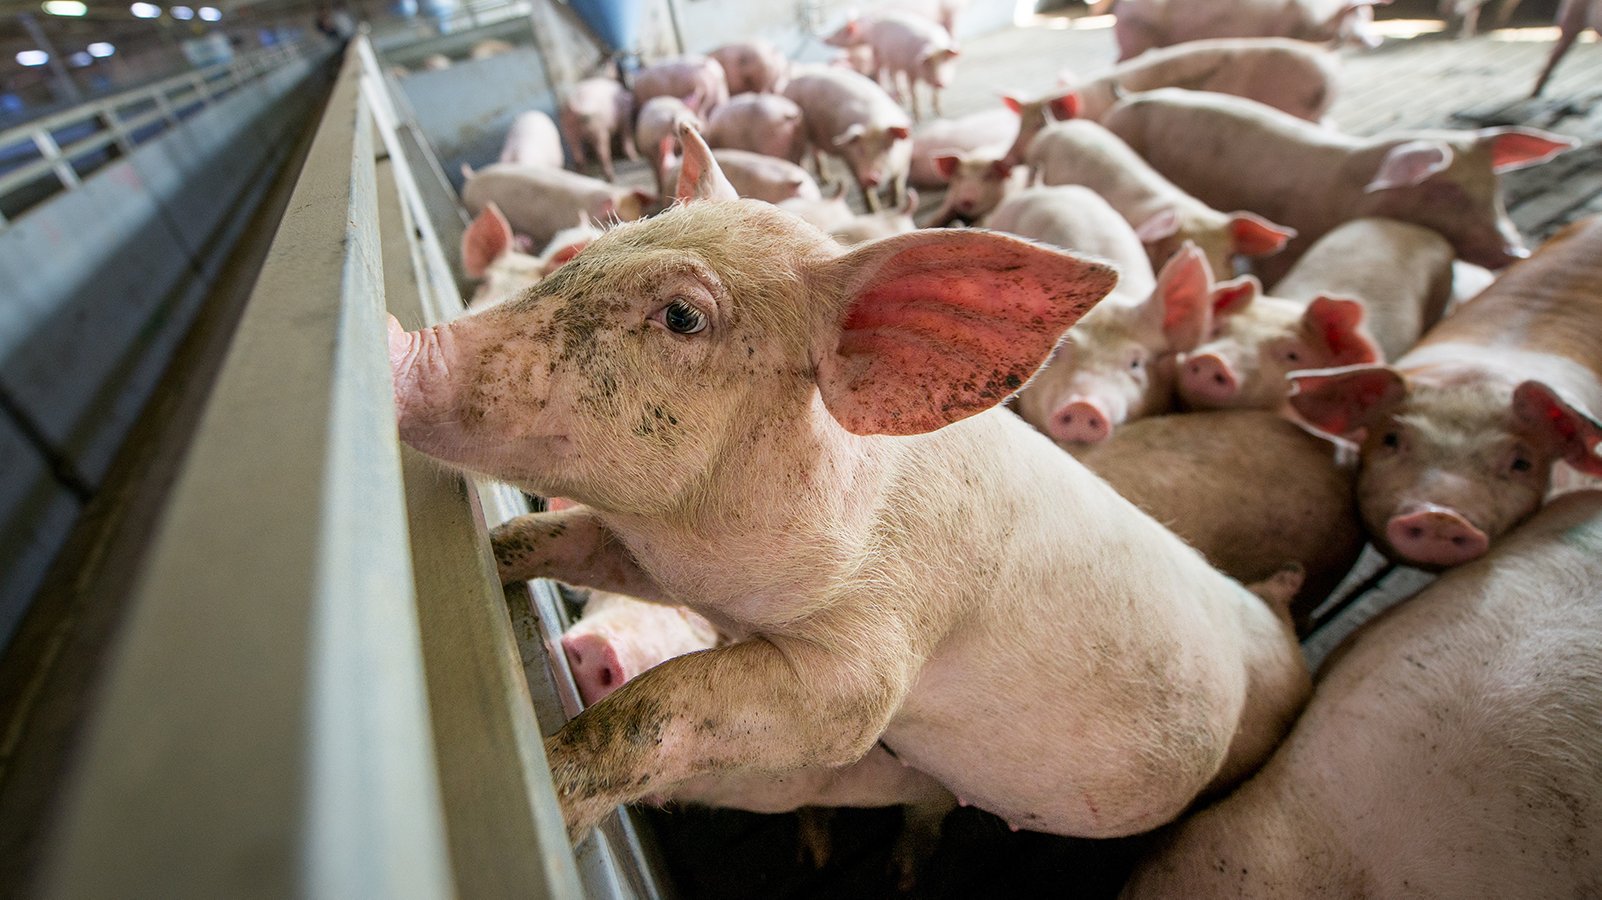 Raising Awareness Of Factory Farm Conditions May Slash Meat Consumption -  Plant Based News